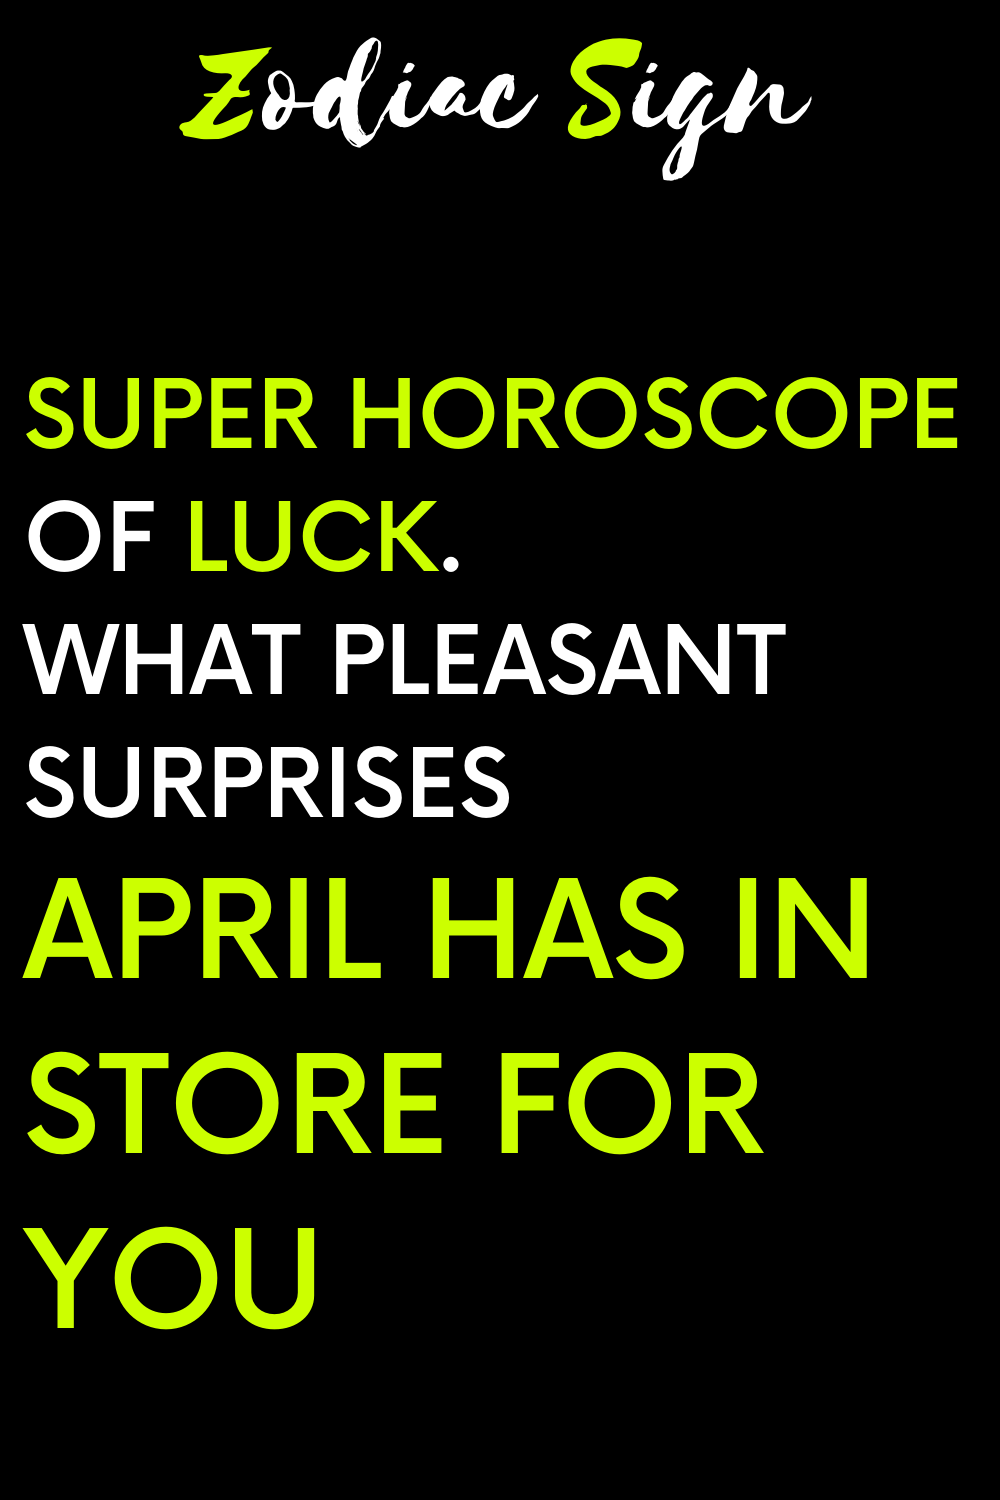 Super horoscope of luck. What pleasant surprises April has in store for you